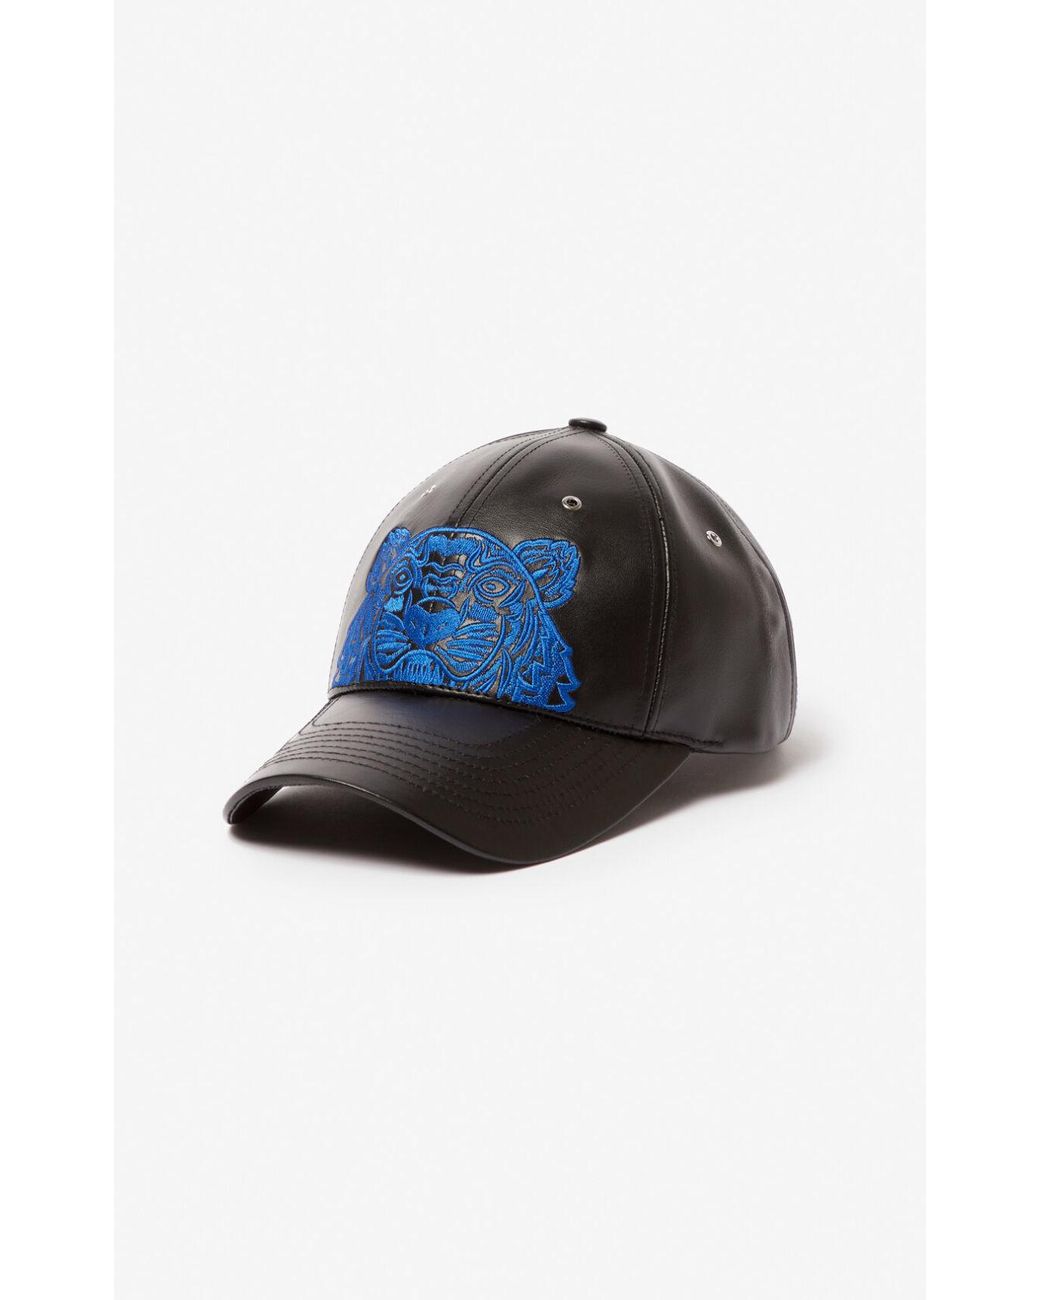 KENZO Tiger Leather Cap in Black for Men | Lyst